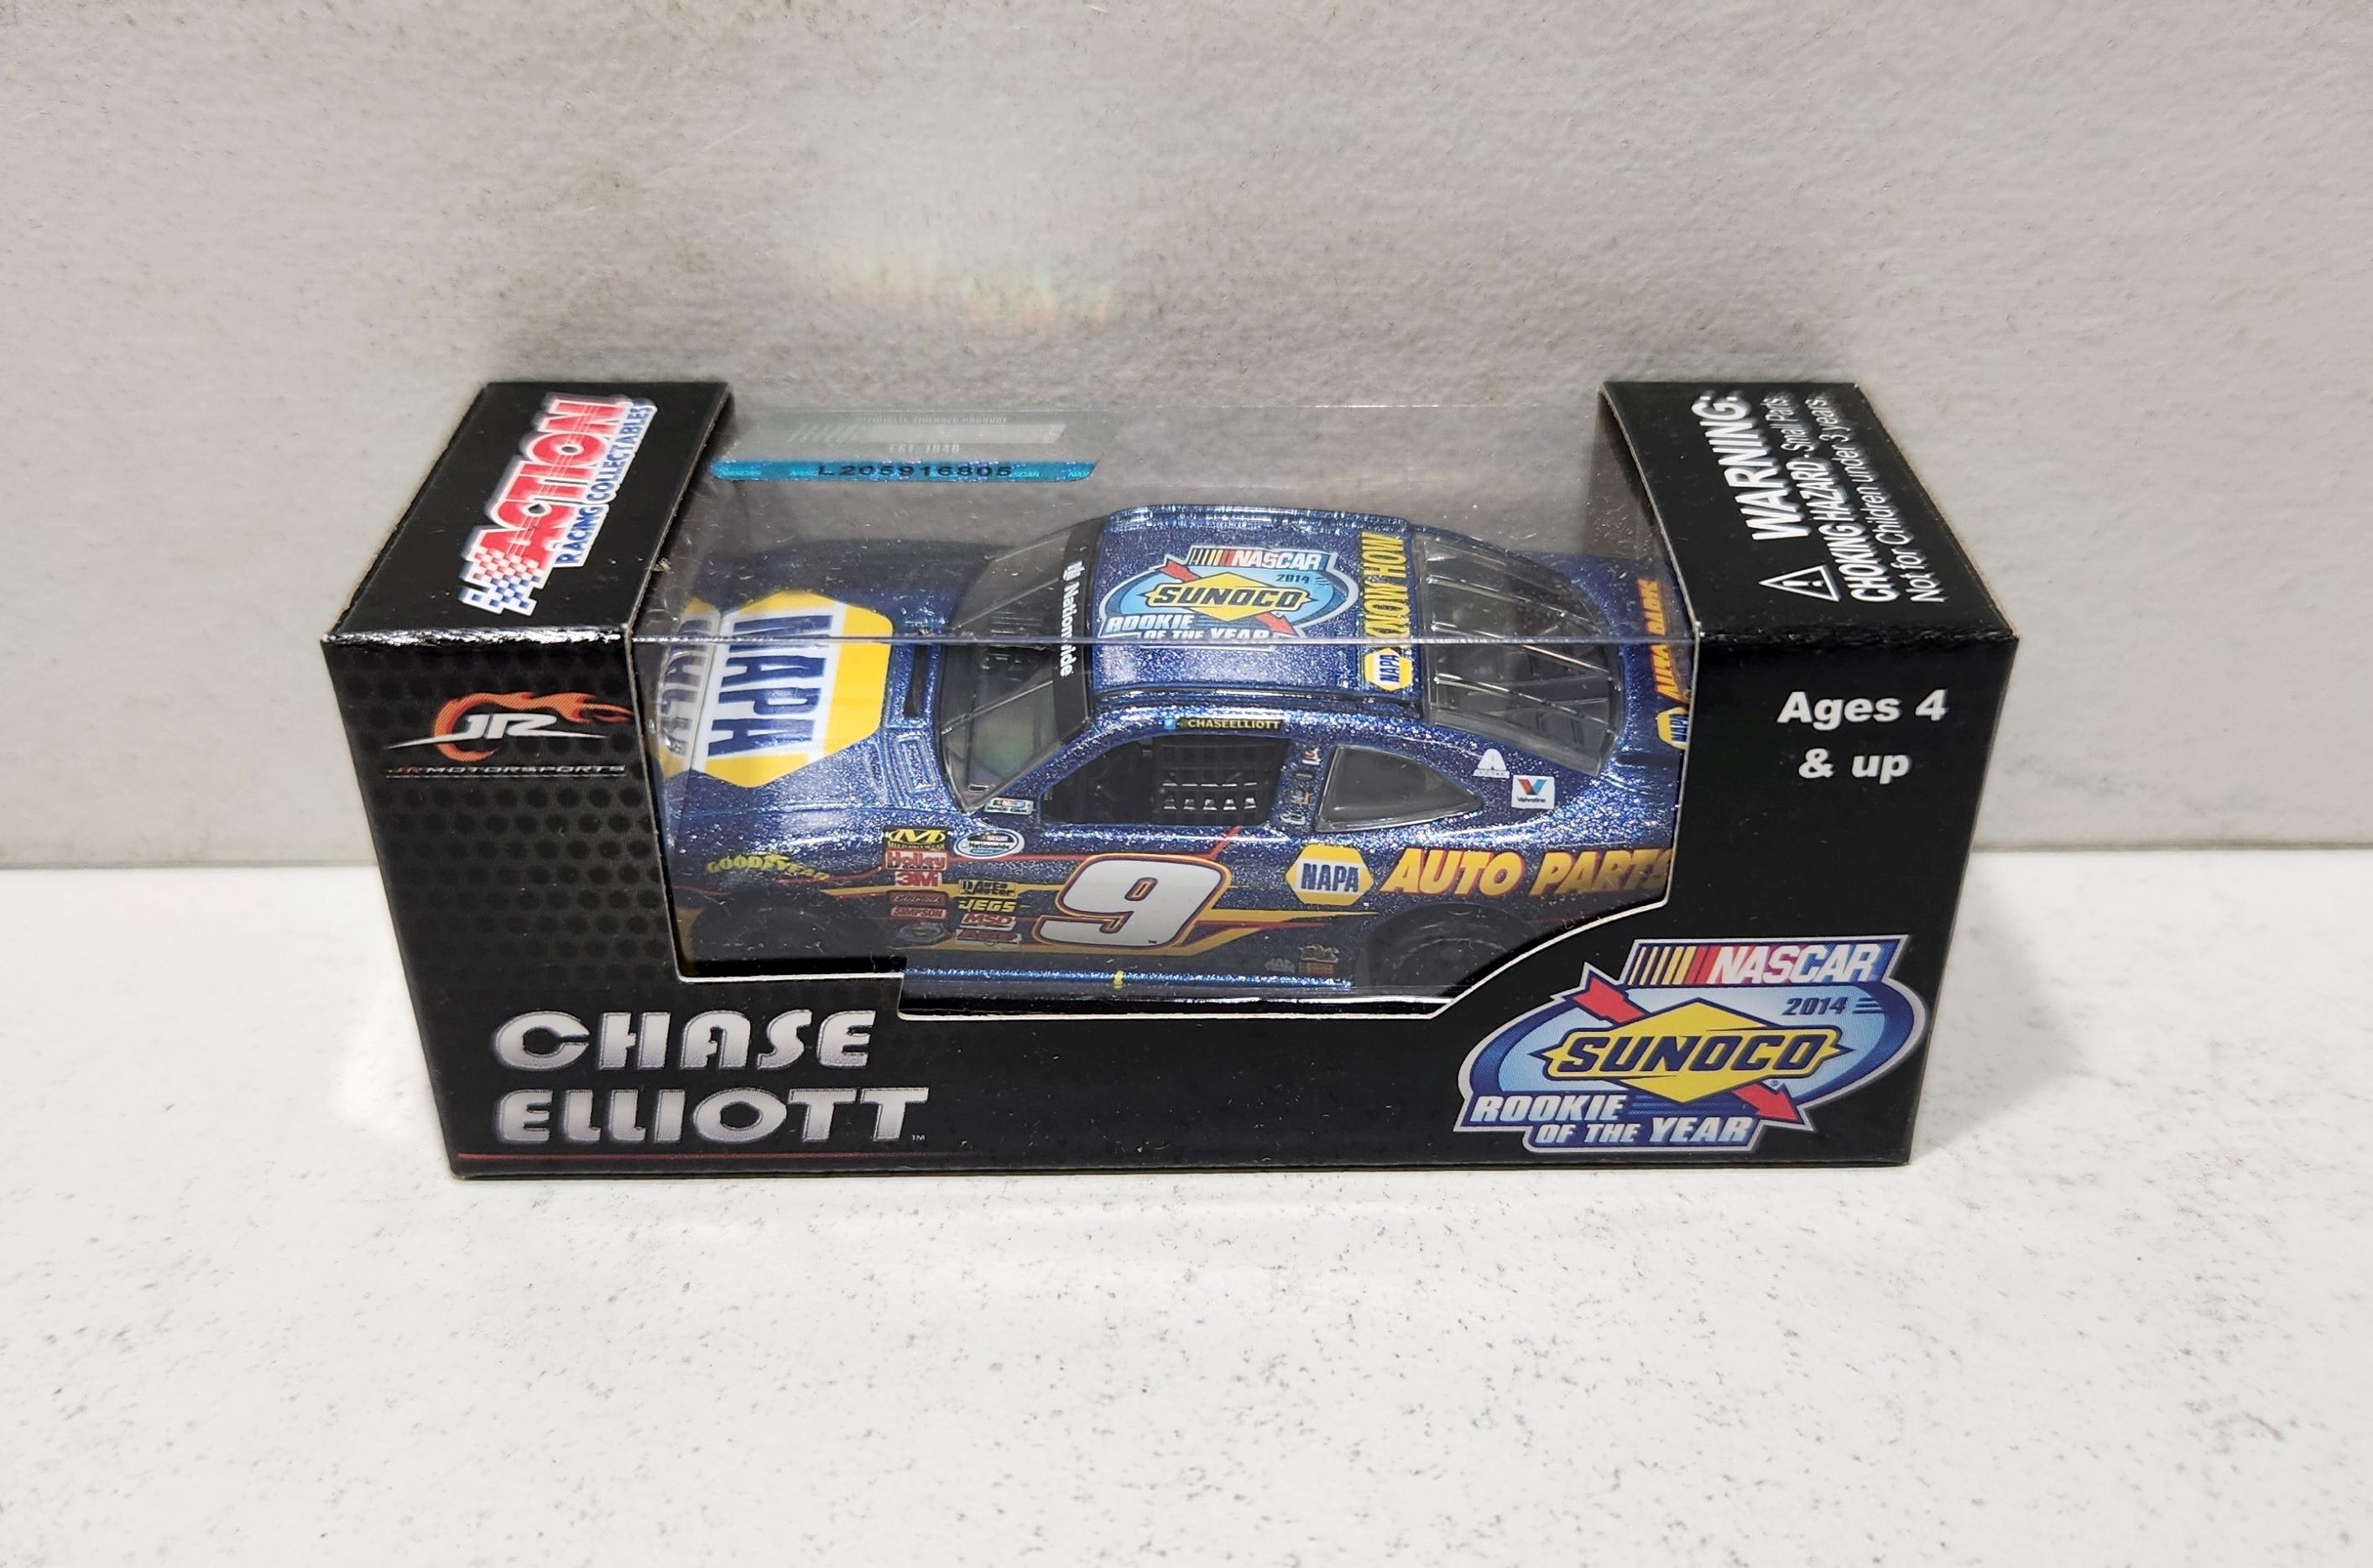 2014 Chase Elliott 1/64th NAPA "Rookie of the Year" "Galaxy Finish" Pitstop Series car